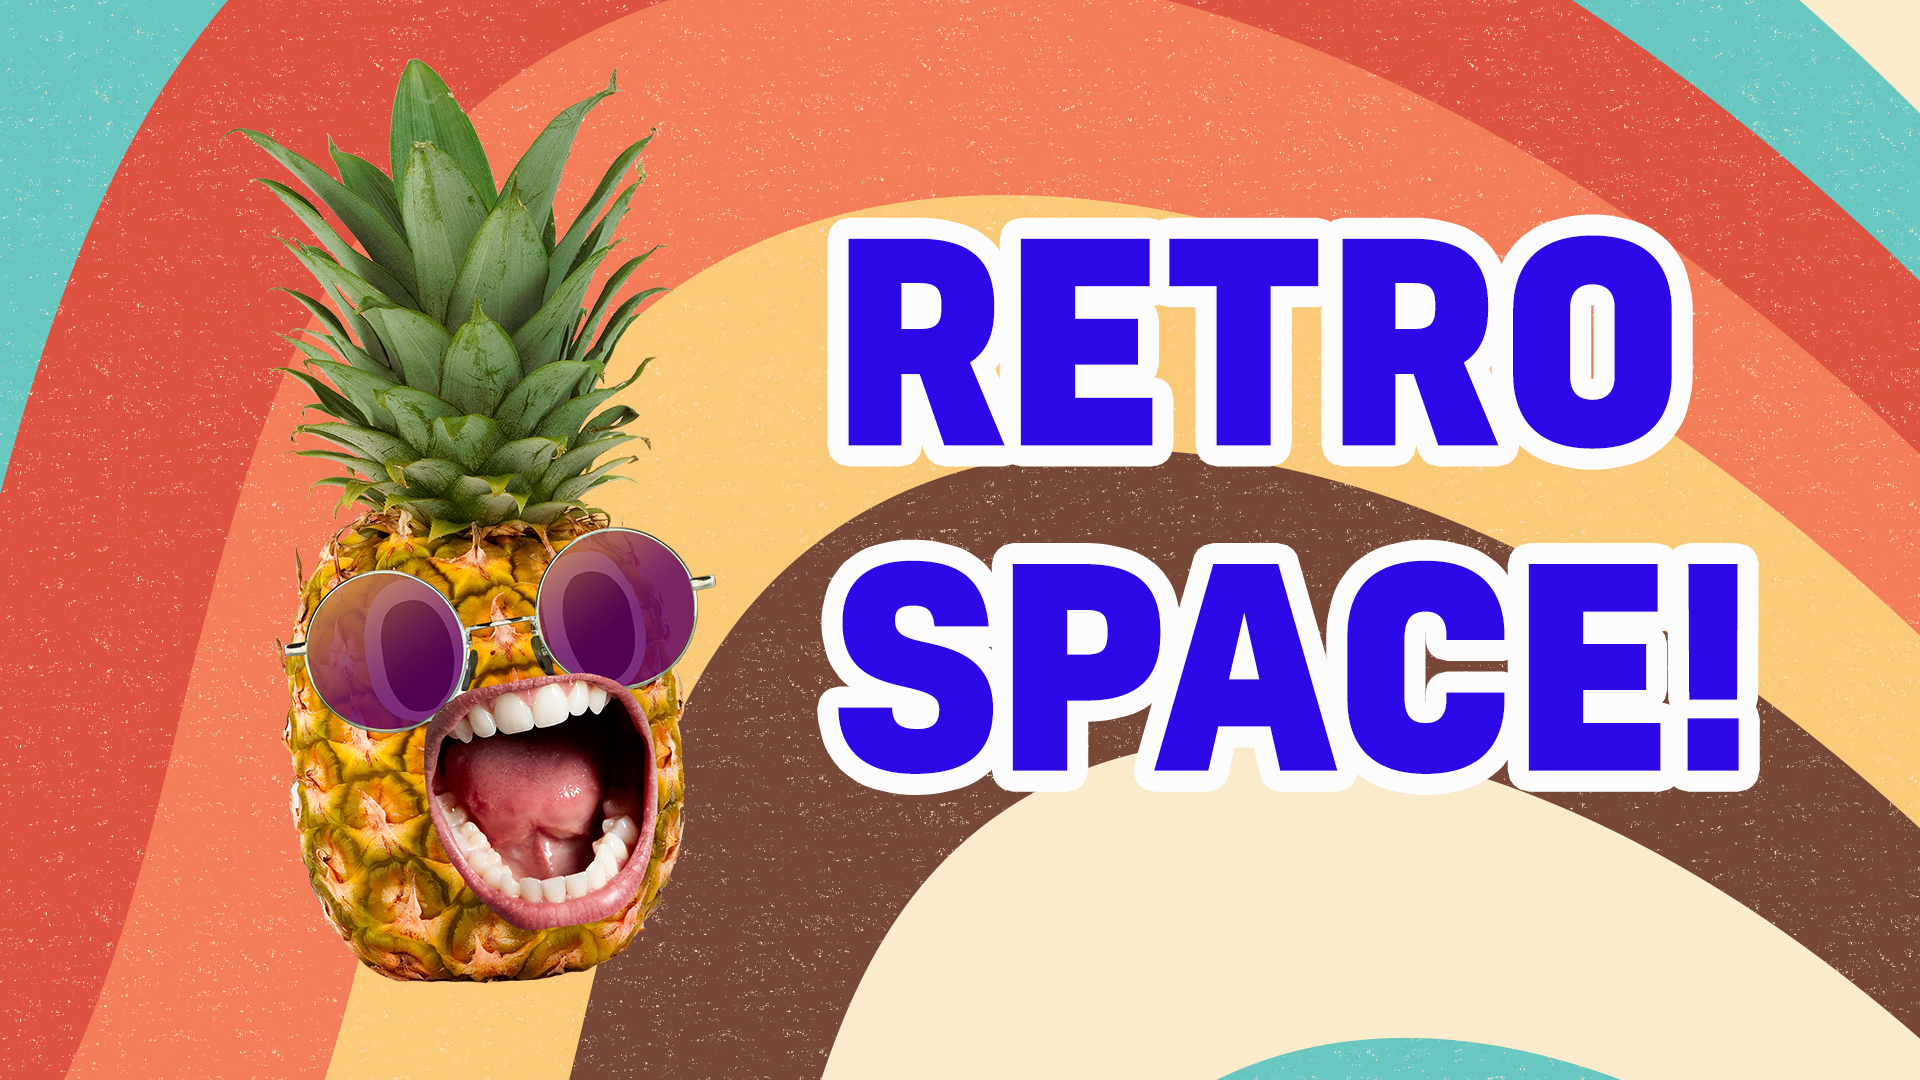 Your Dance Dash track is Retro Space! You love disco beats and funky grooves!